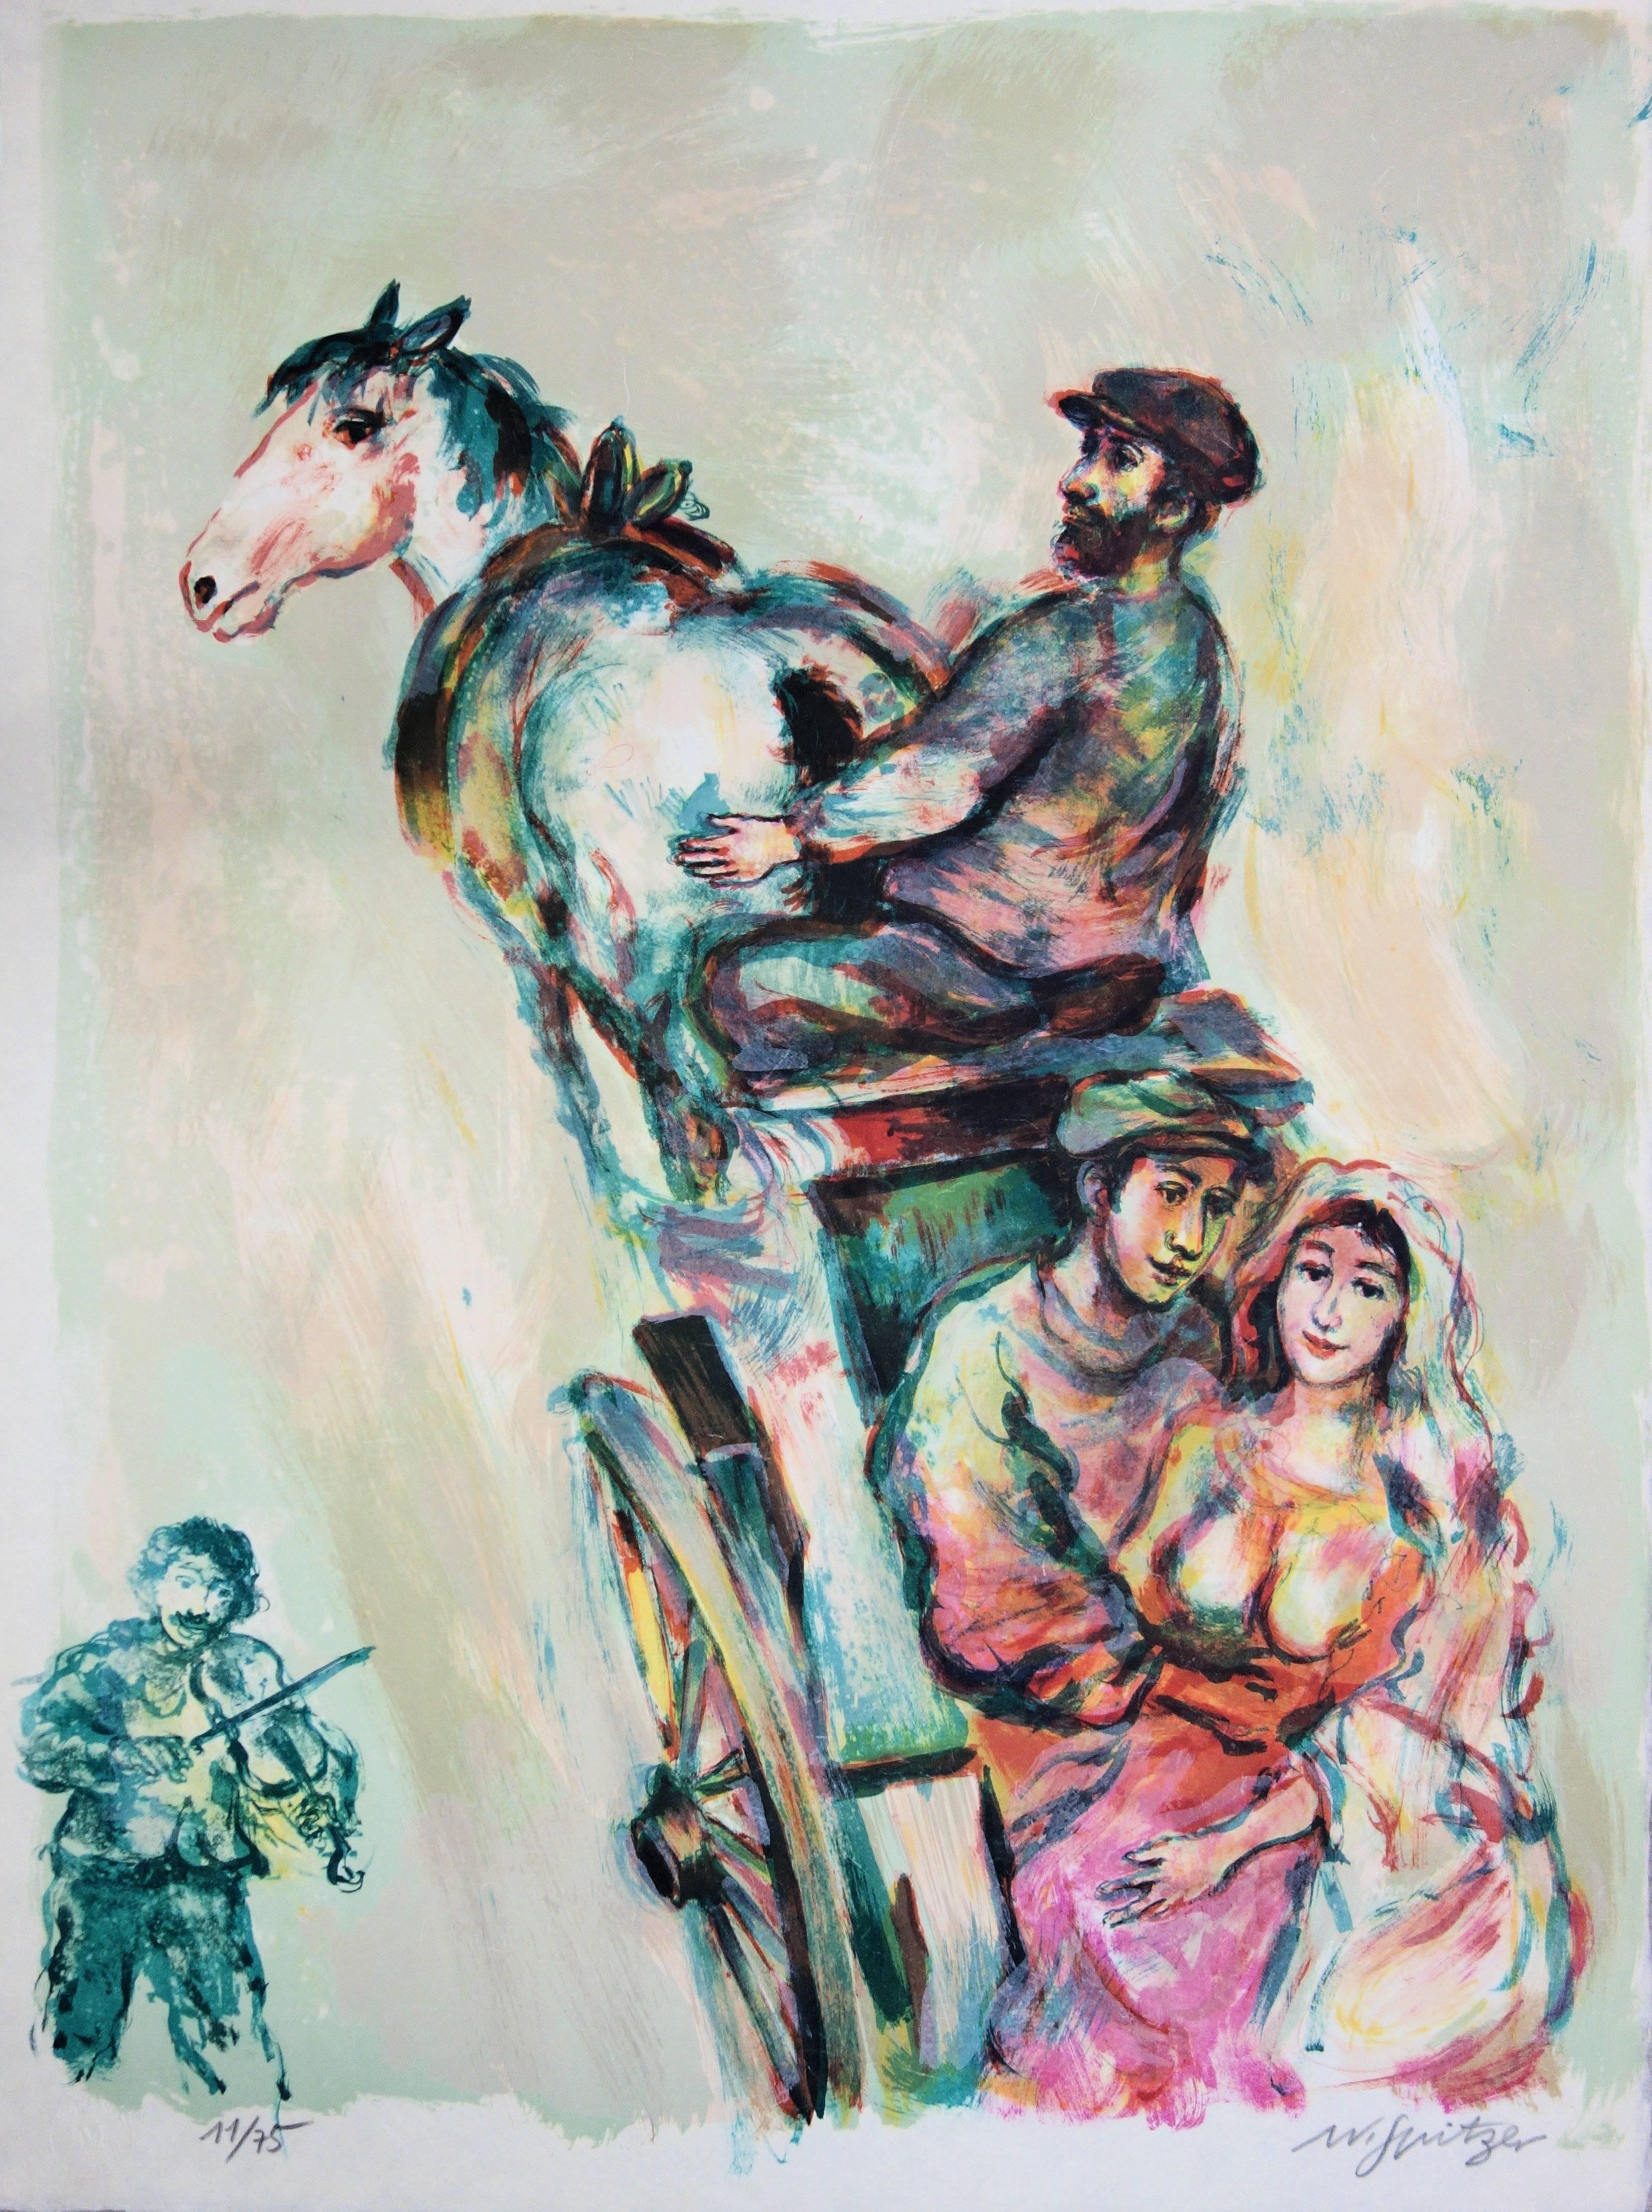 Walter Spitzer Figurative Print - Lovers in a Carriage - Handsigned lithograph /75 ex